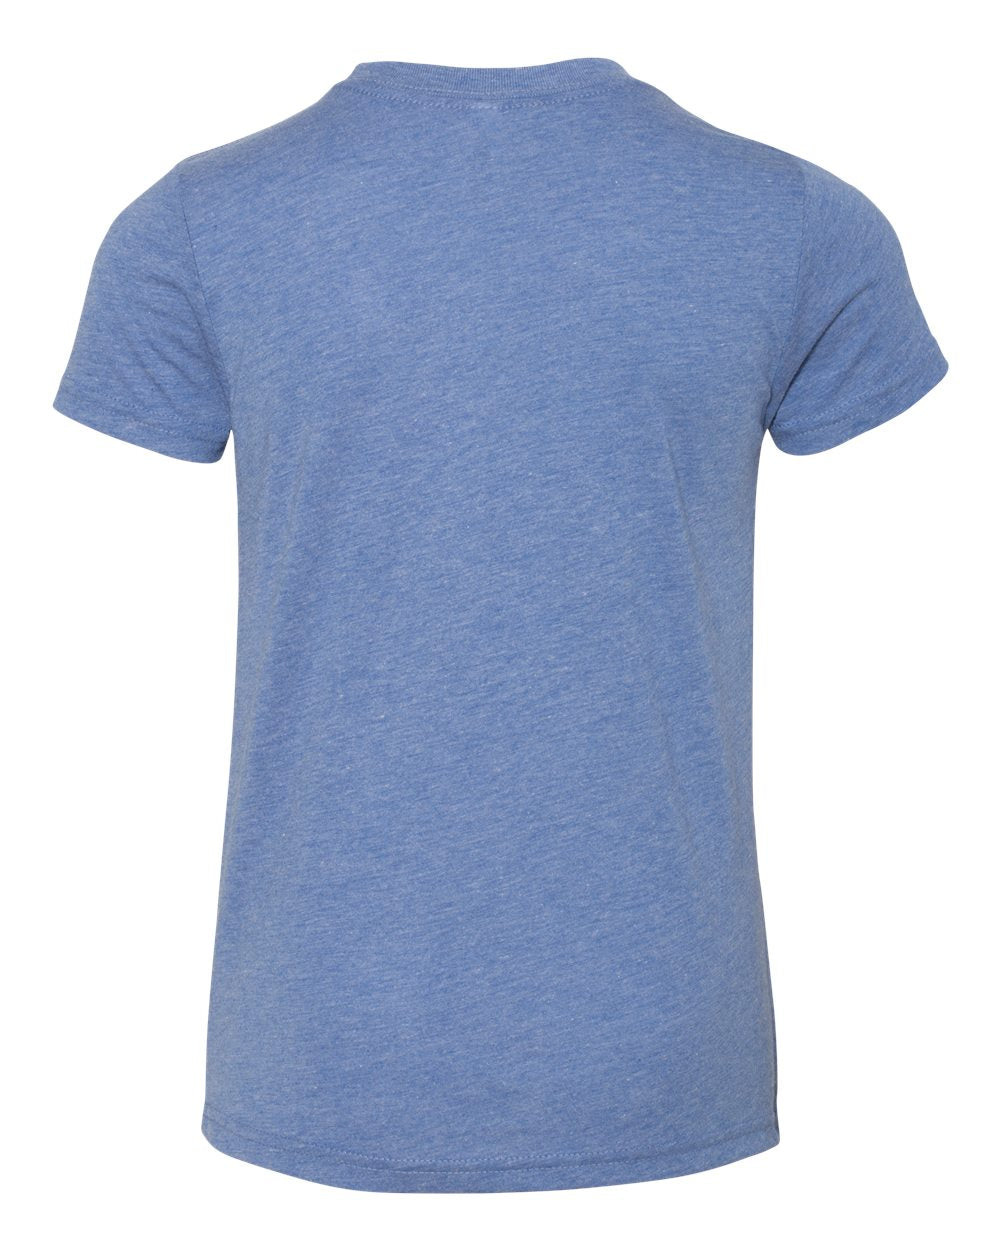 BELLA + CANVAS Youth Triblend Tee 3413Y #color_Blue Triblend